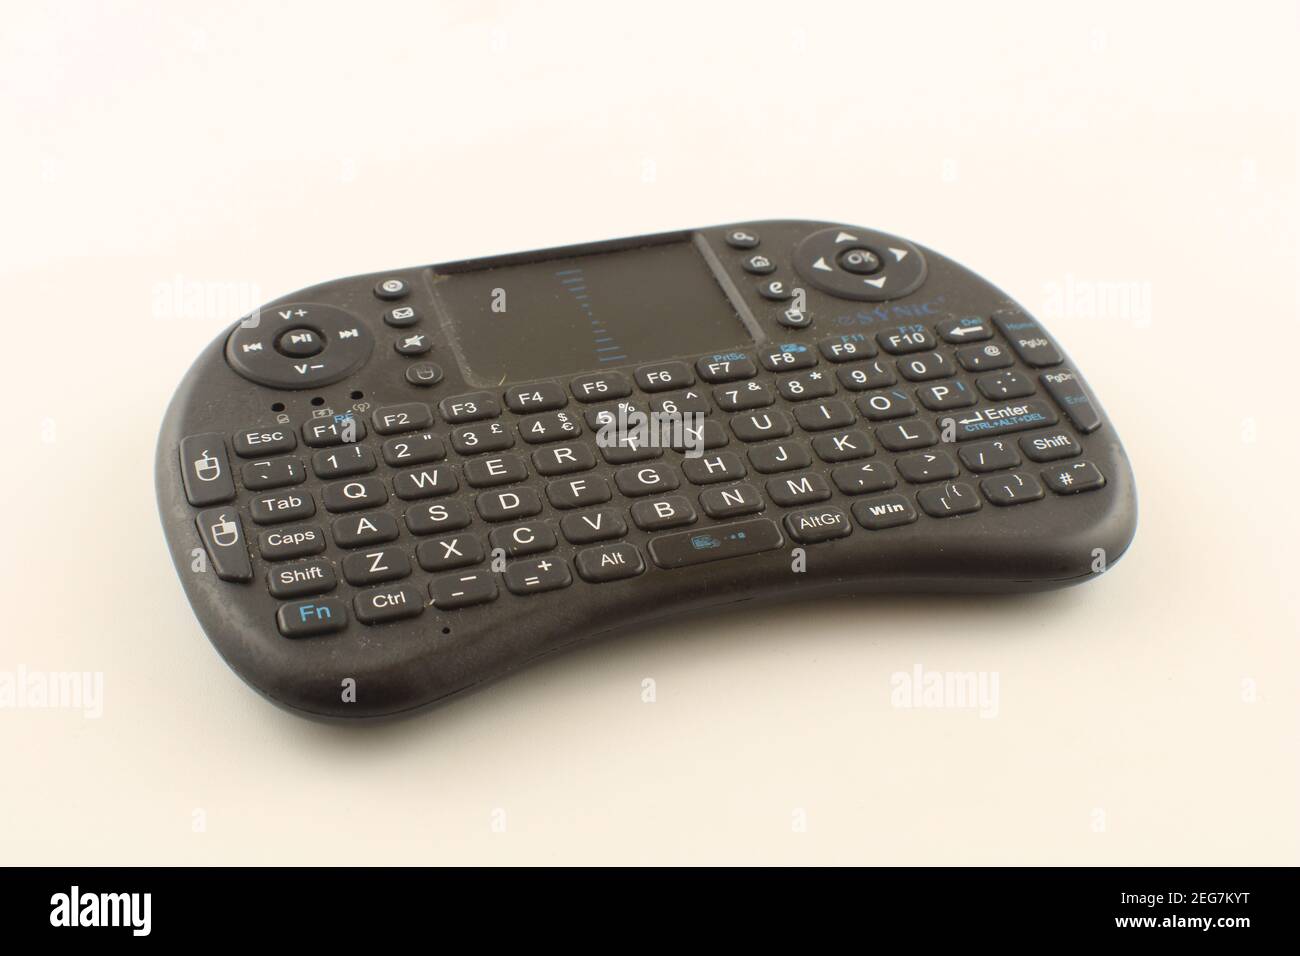 Wireless mouse keyboard with multifunctional touchpad for laptop or tablet , kidney shaped keyboard Stock Photo